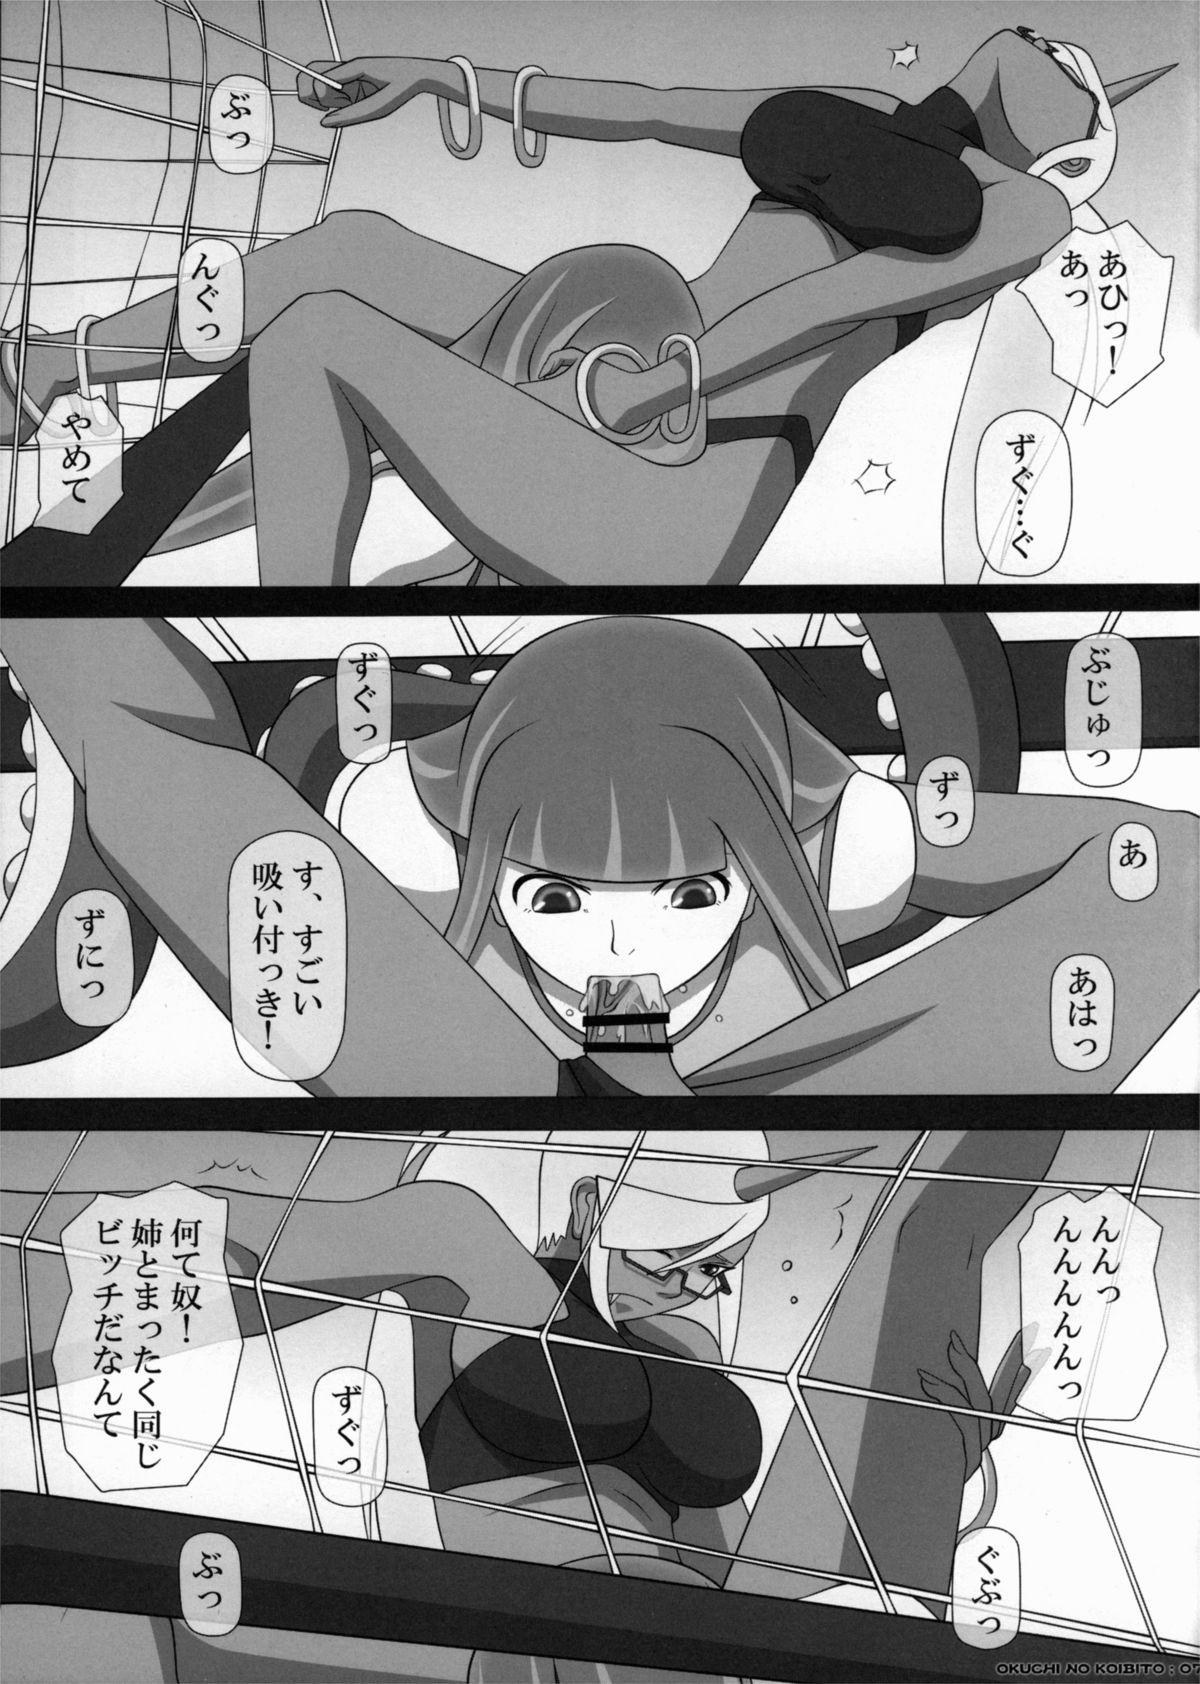 Hole SWEET HOLE - Panty and stocking with garterbelt Thai - Page 7